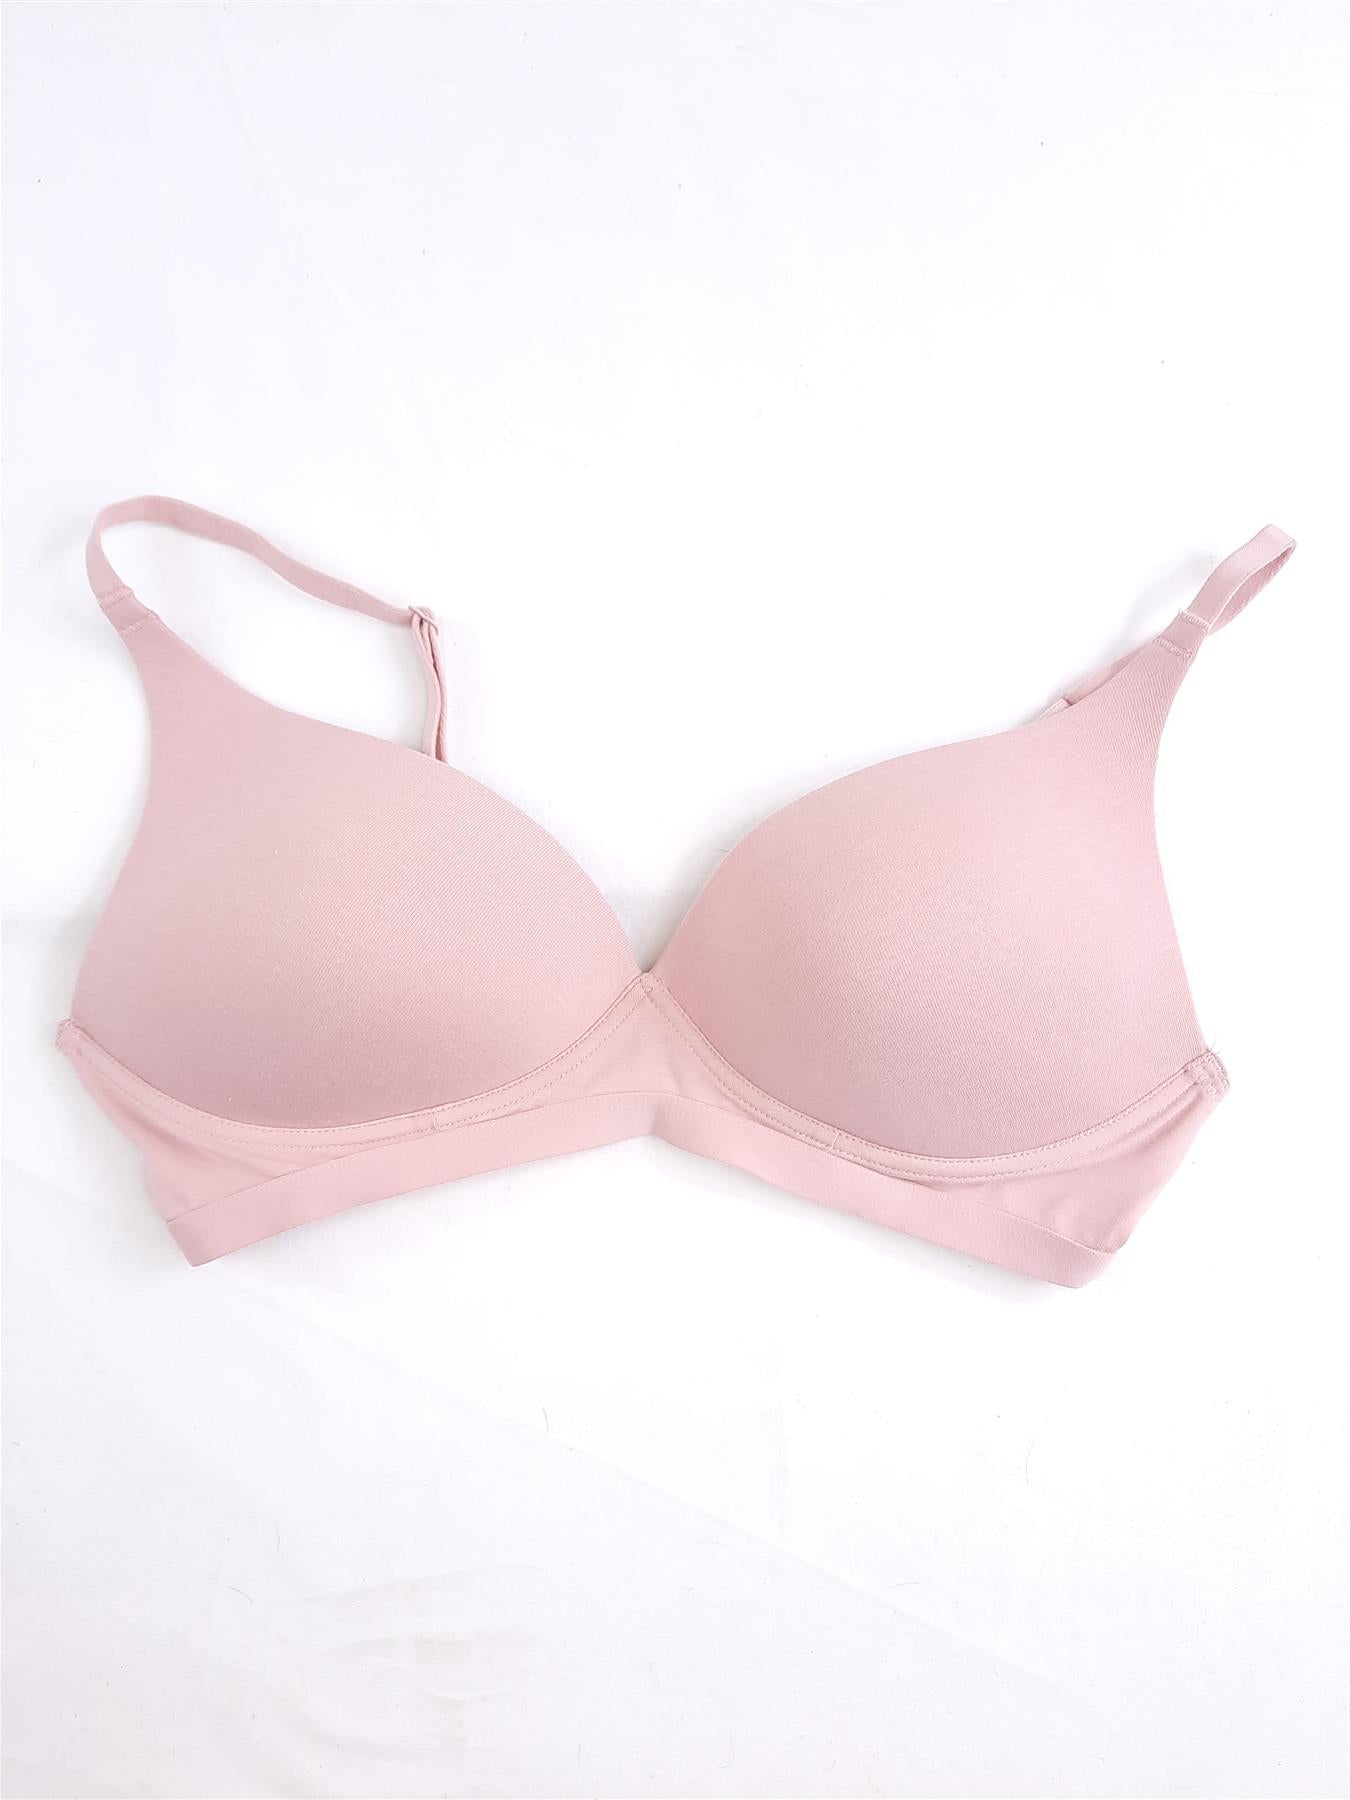 M S Full Cup Non-Wired T-Shirt Bra Cotton Rich Soft Comfort Support Brand New